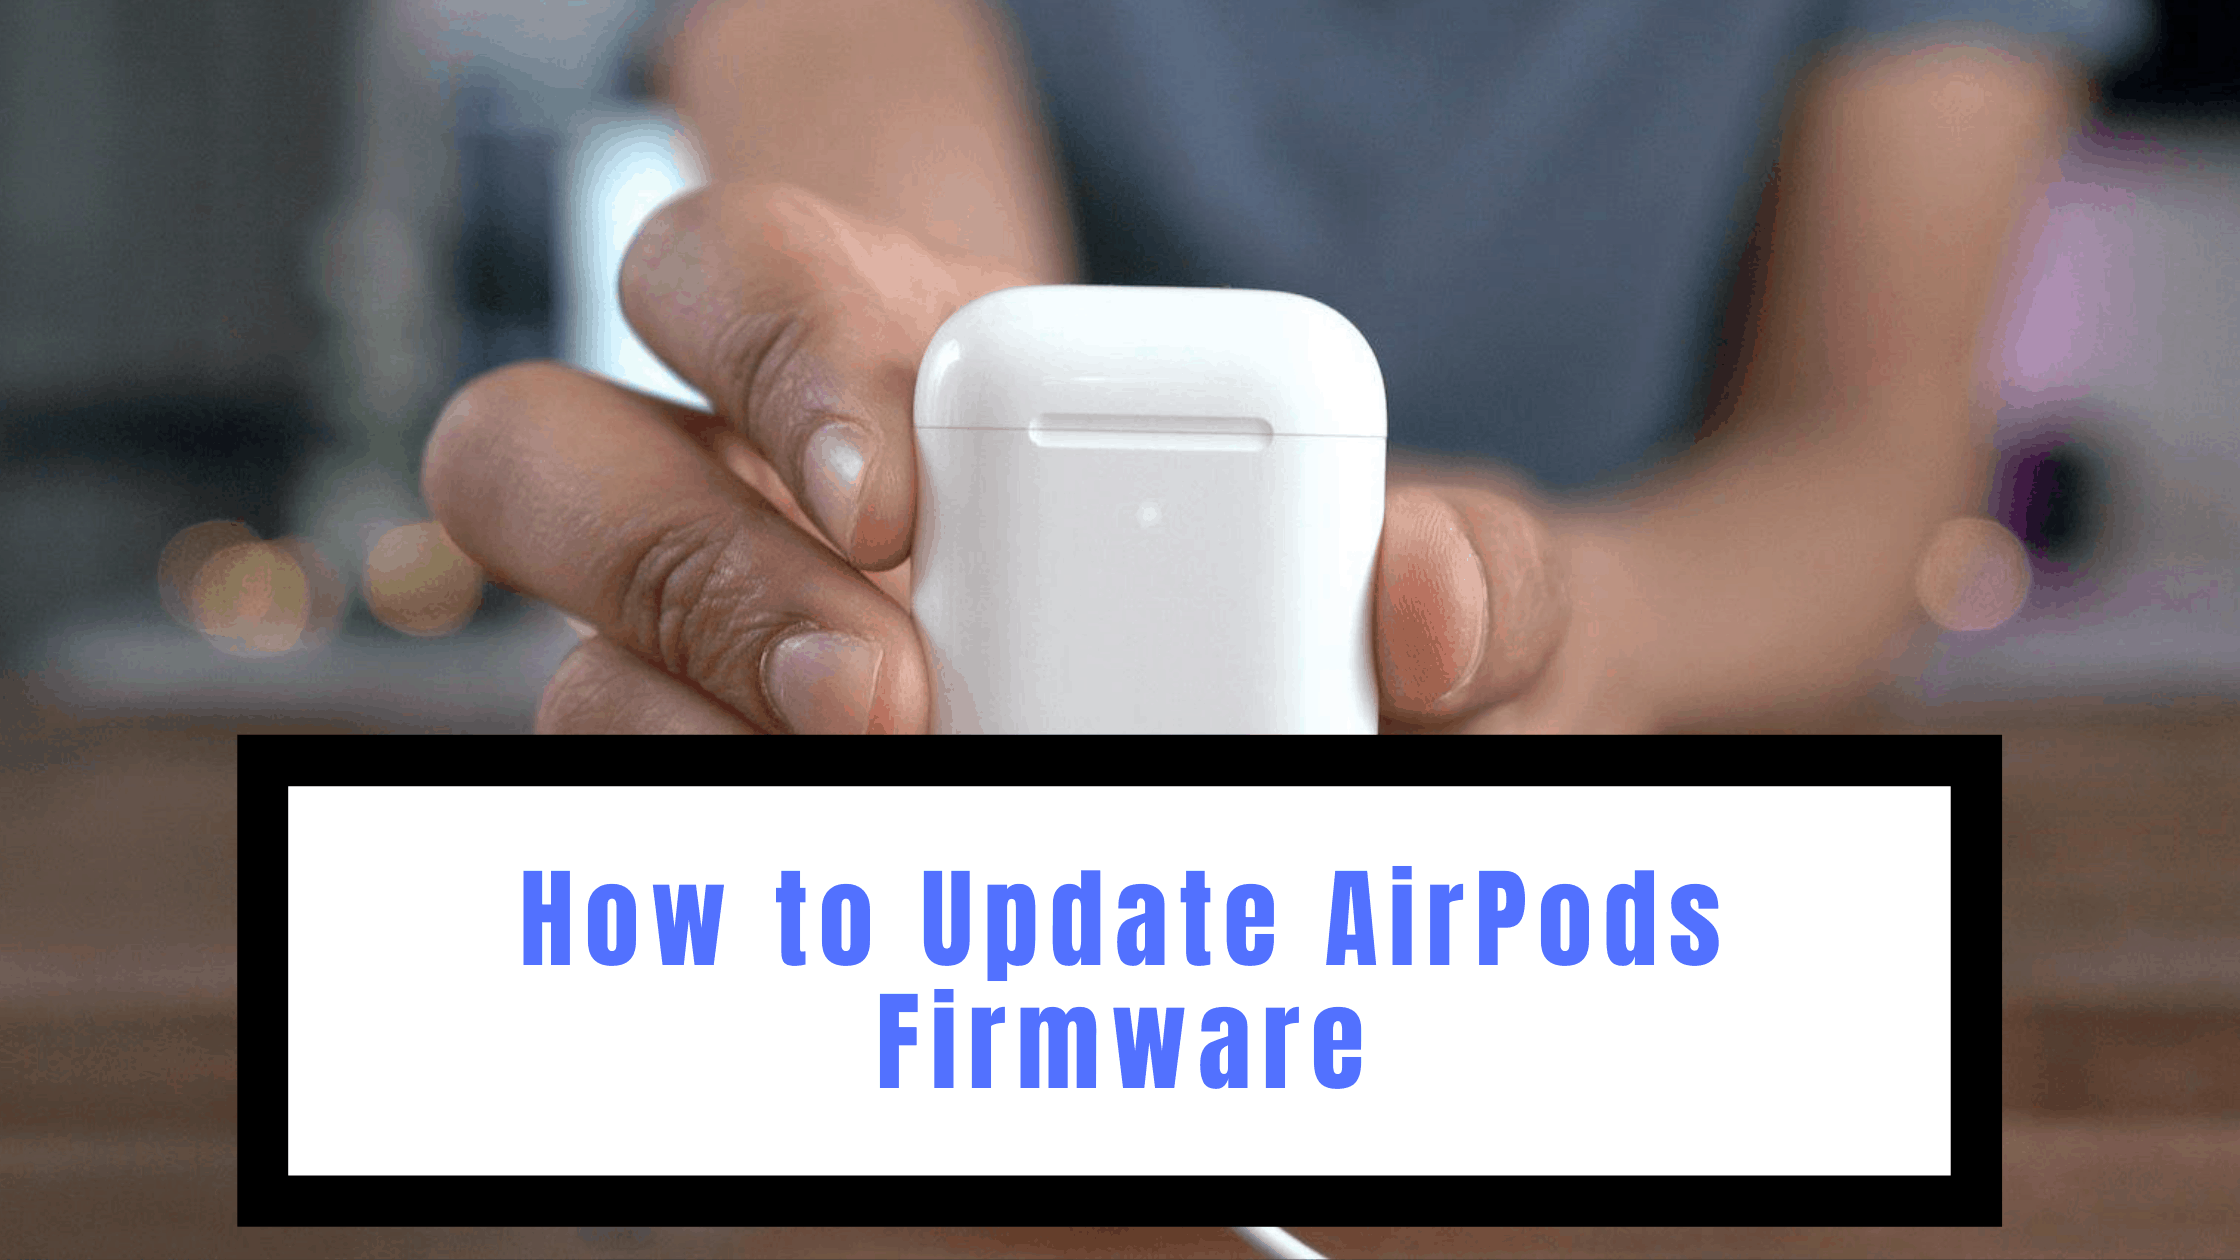 How to Update AirPods Firmware